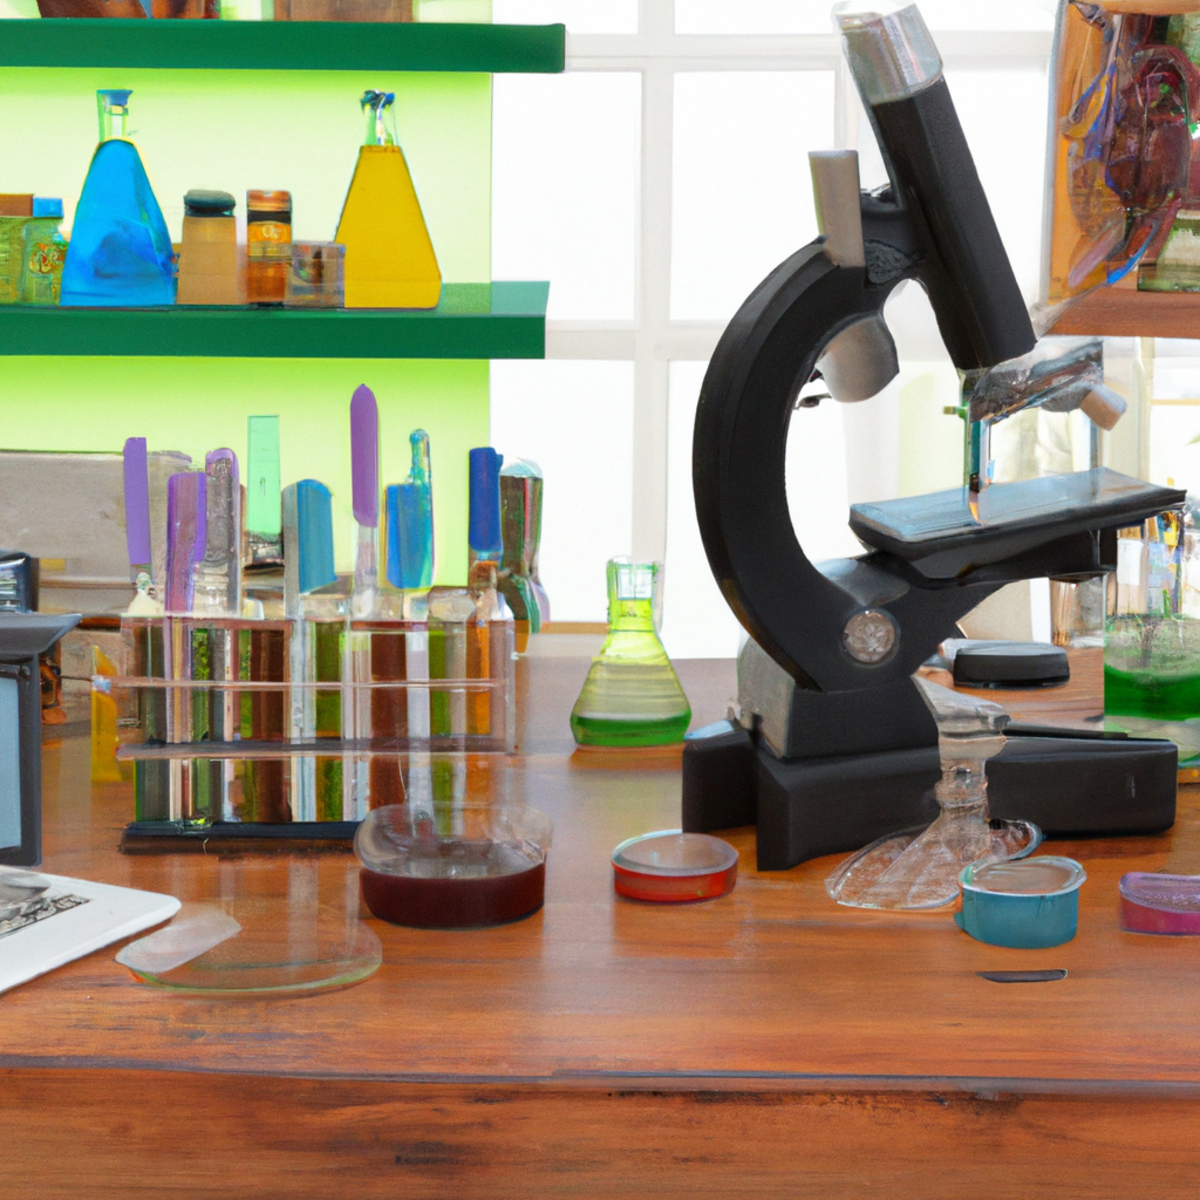 Laboratory scene with microscope, test tubes, petri dishes, computer screen, books, and reference materials. Symbolizes scientific exploration of Floating-Harbor Syndrome.